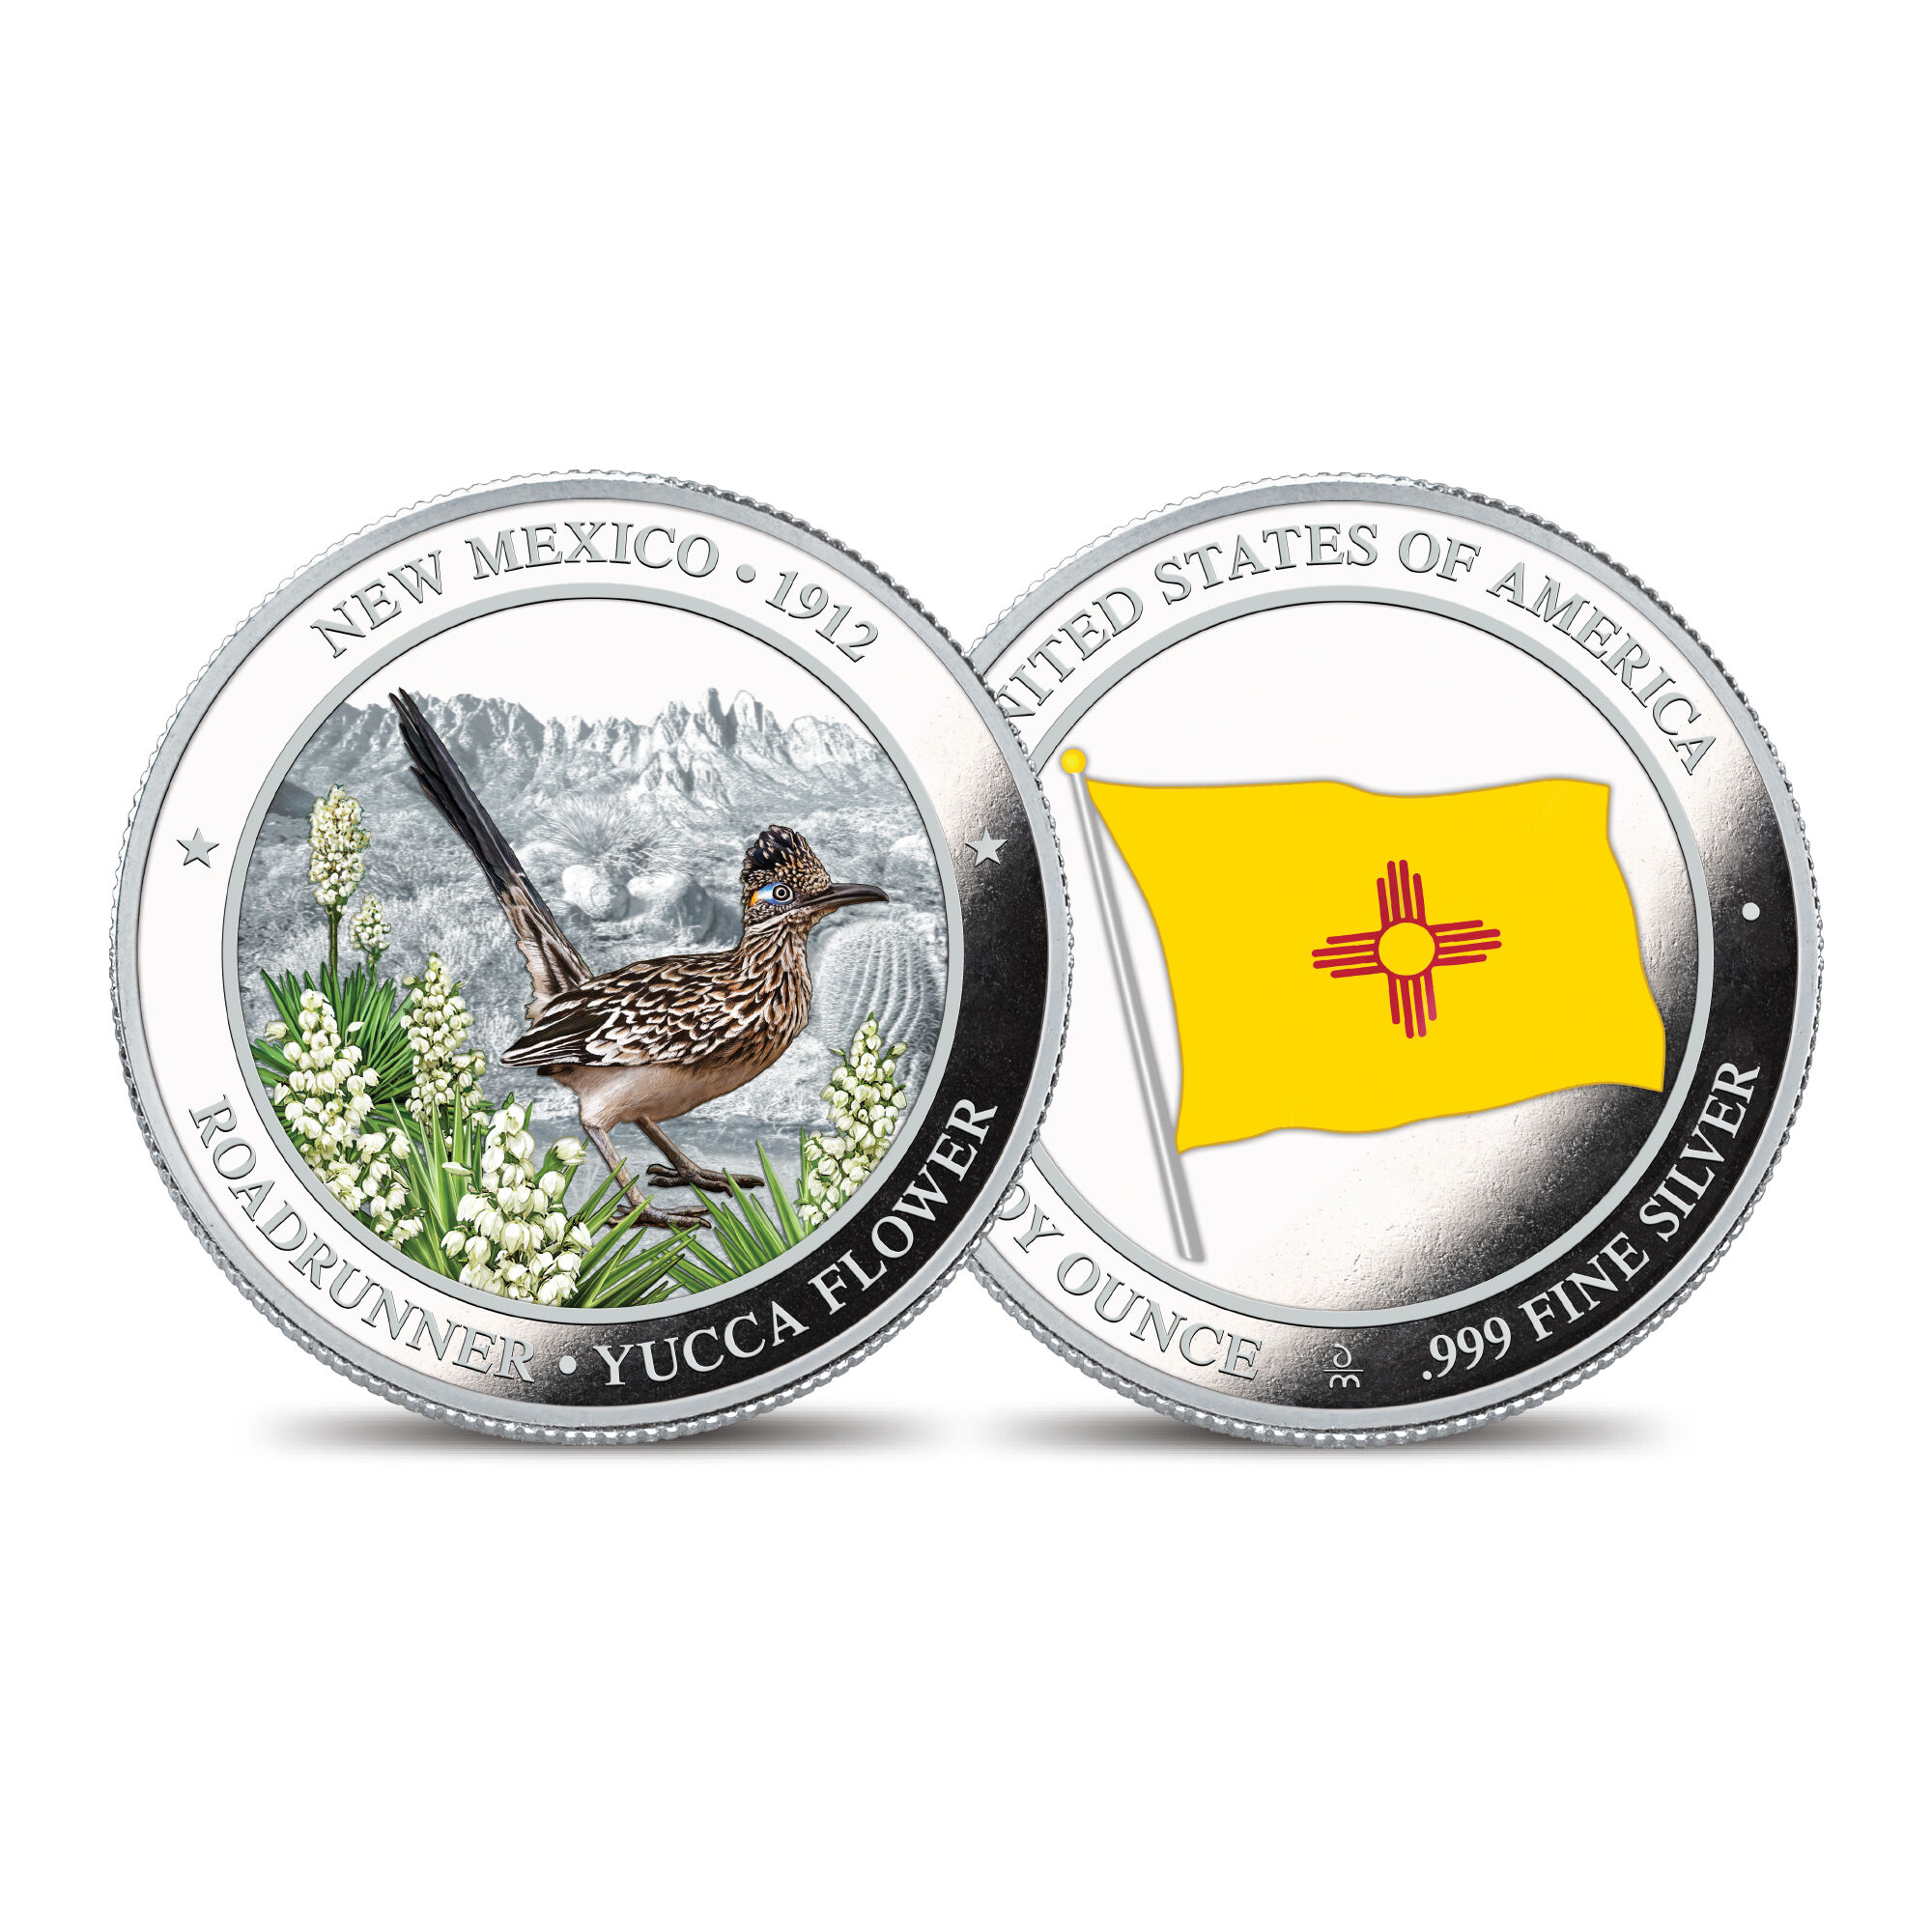 The State Bird and Flower Silver Commemoratives 2167 0088 a commemorativeNM